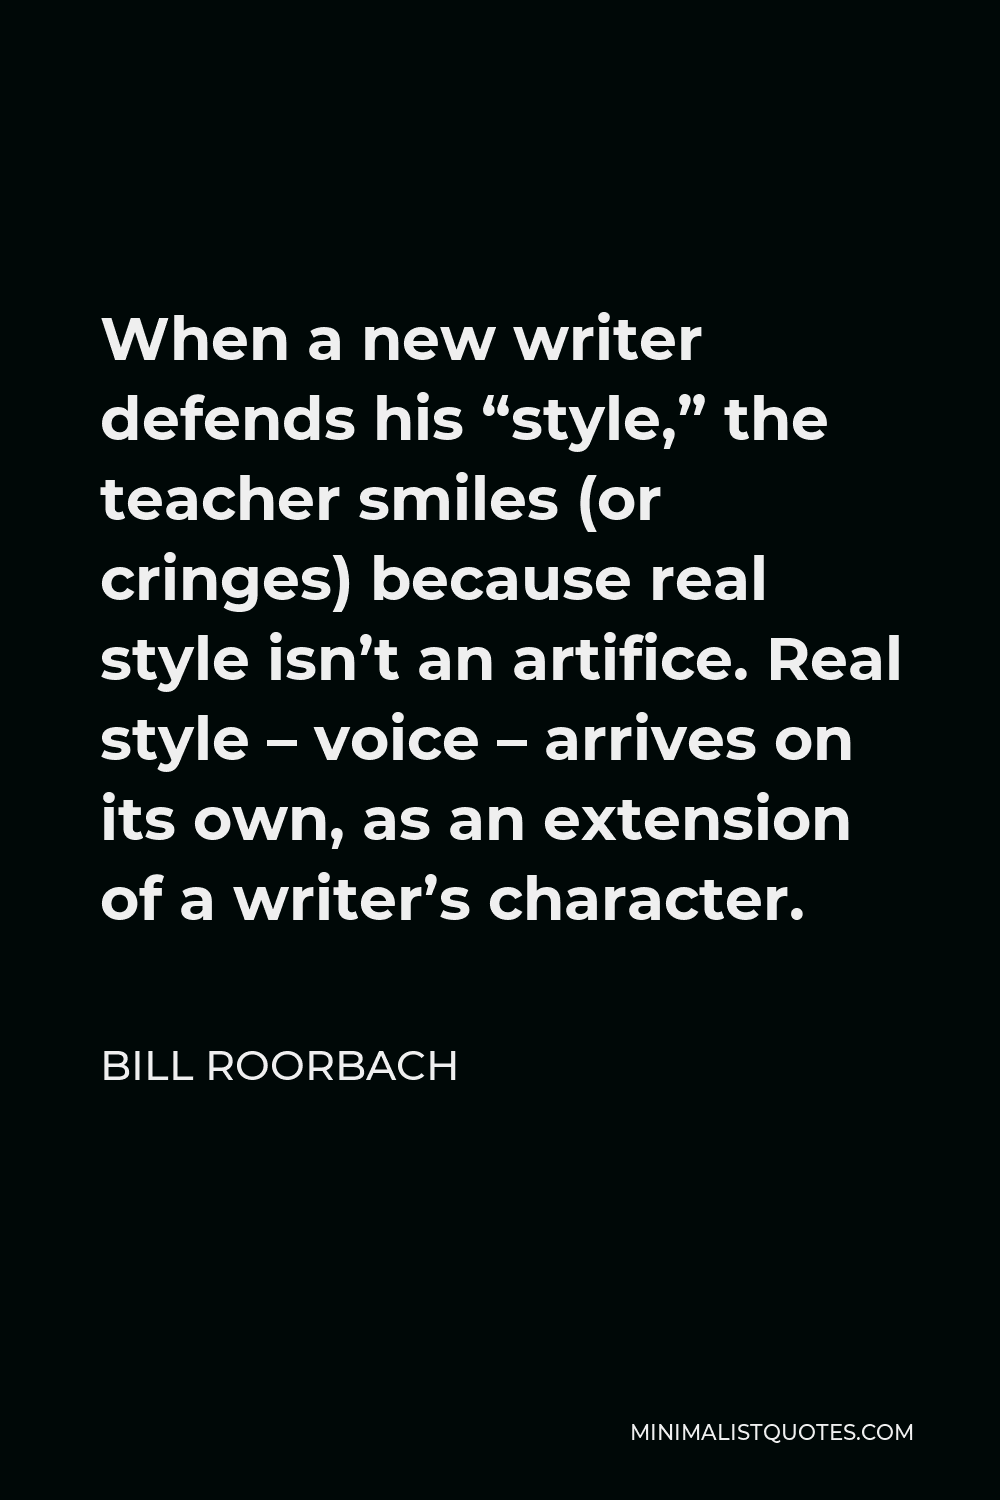 Bill Roorbach Quote - When a new writer defends his “style,” the teacher smiles (or cringes) because real style isn’t an artifice. Real style – voice – arrives on its own, as an extension of a writer’s character.